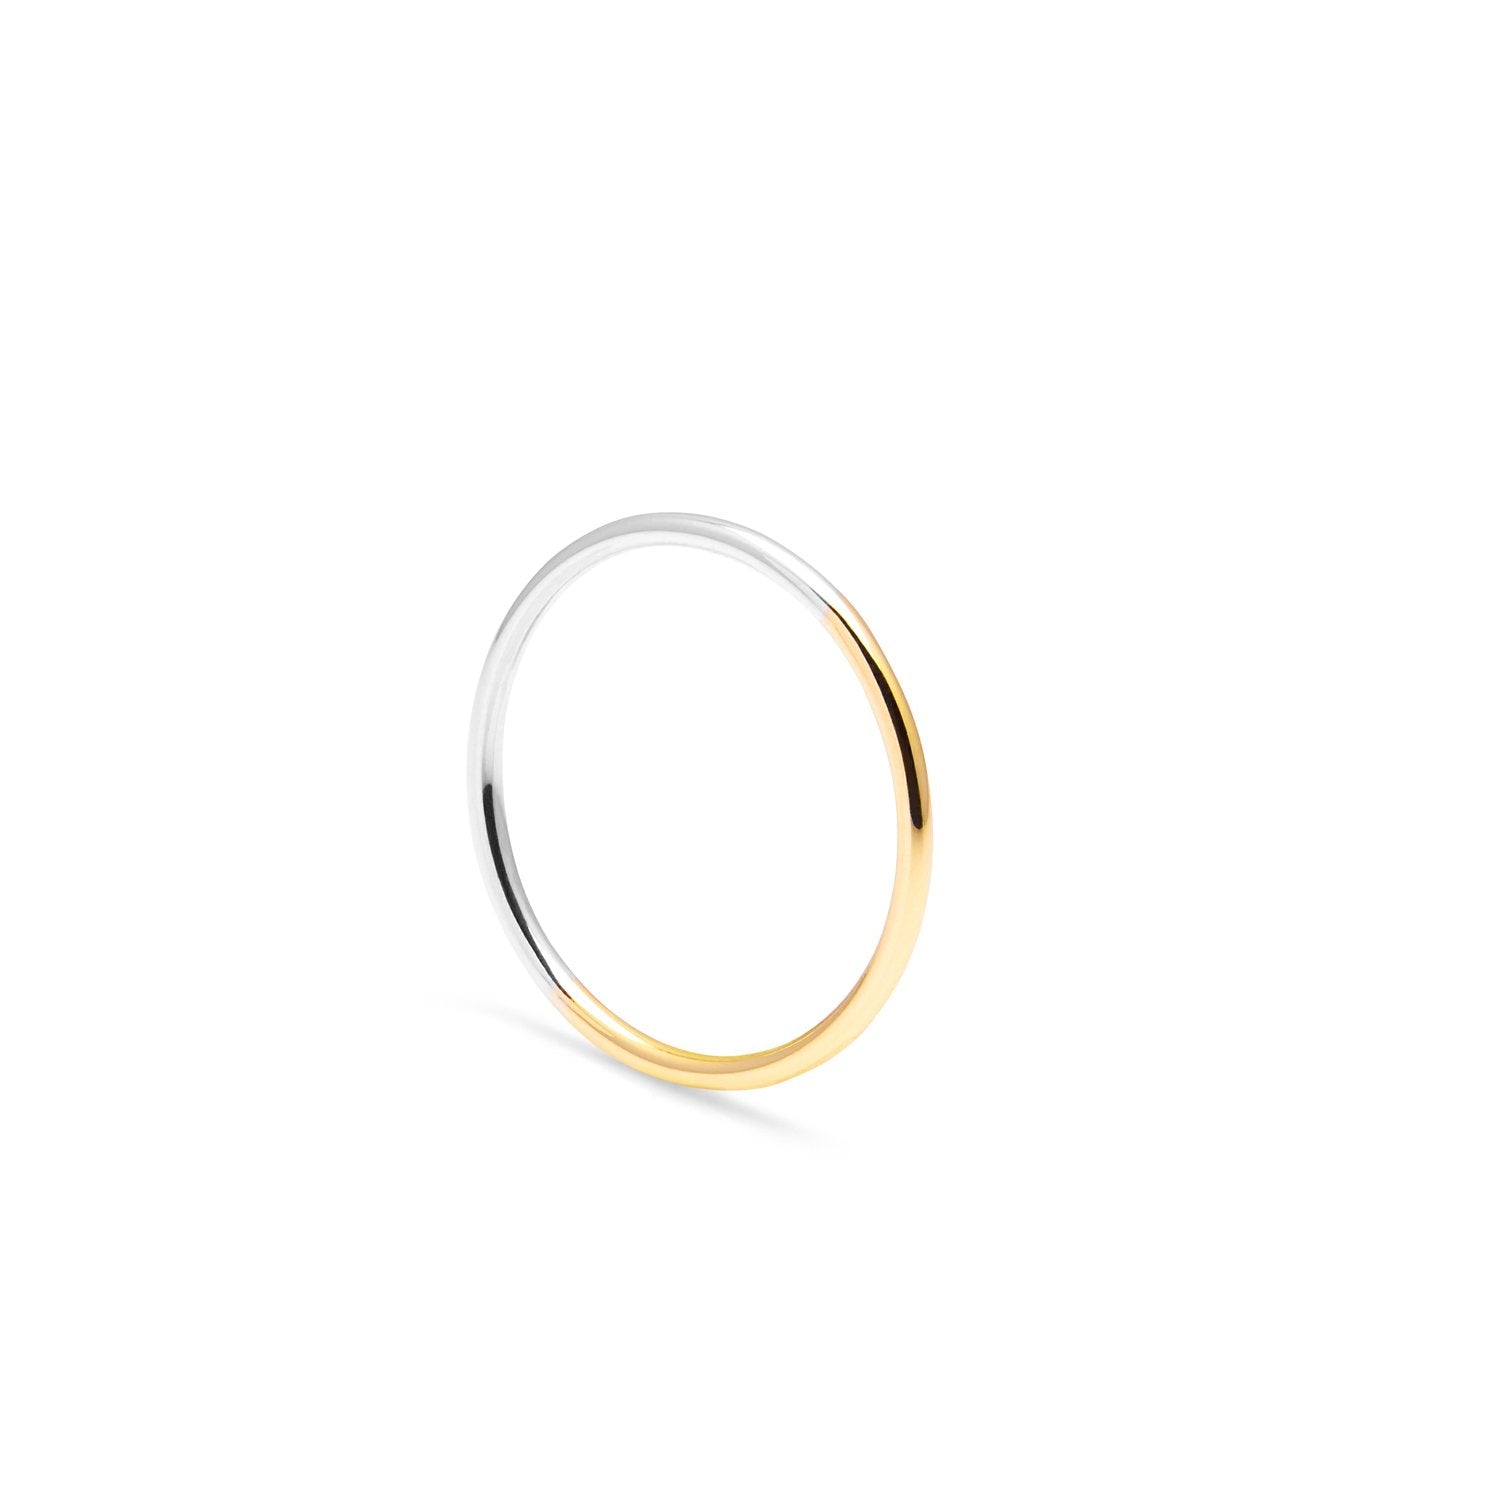 Two-tone Skinny Round Stacking Ring - 9k Yellow Gold & Silver - Myia Bonner Jewellery